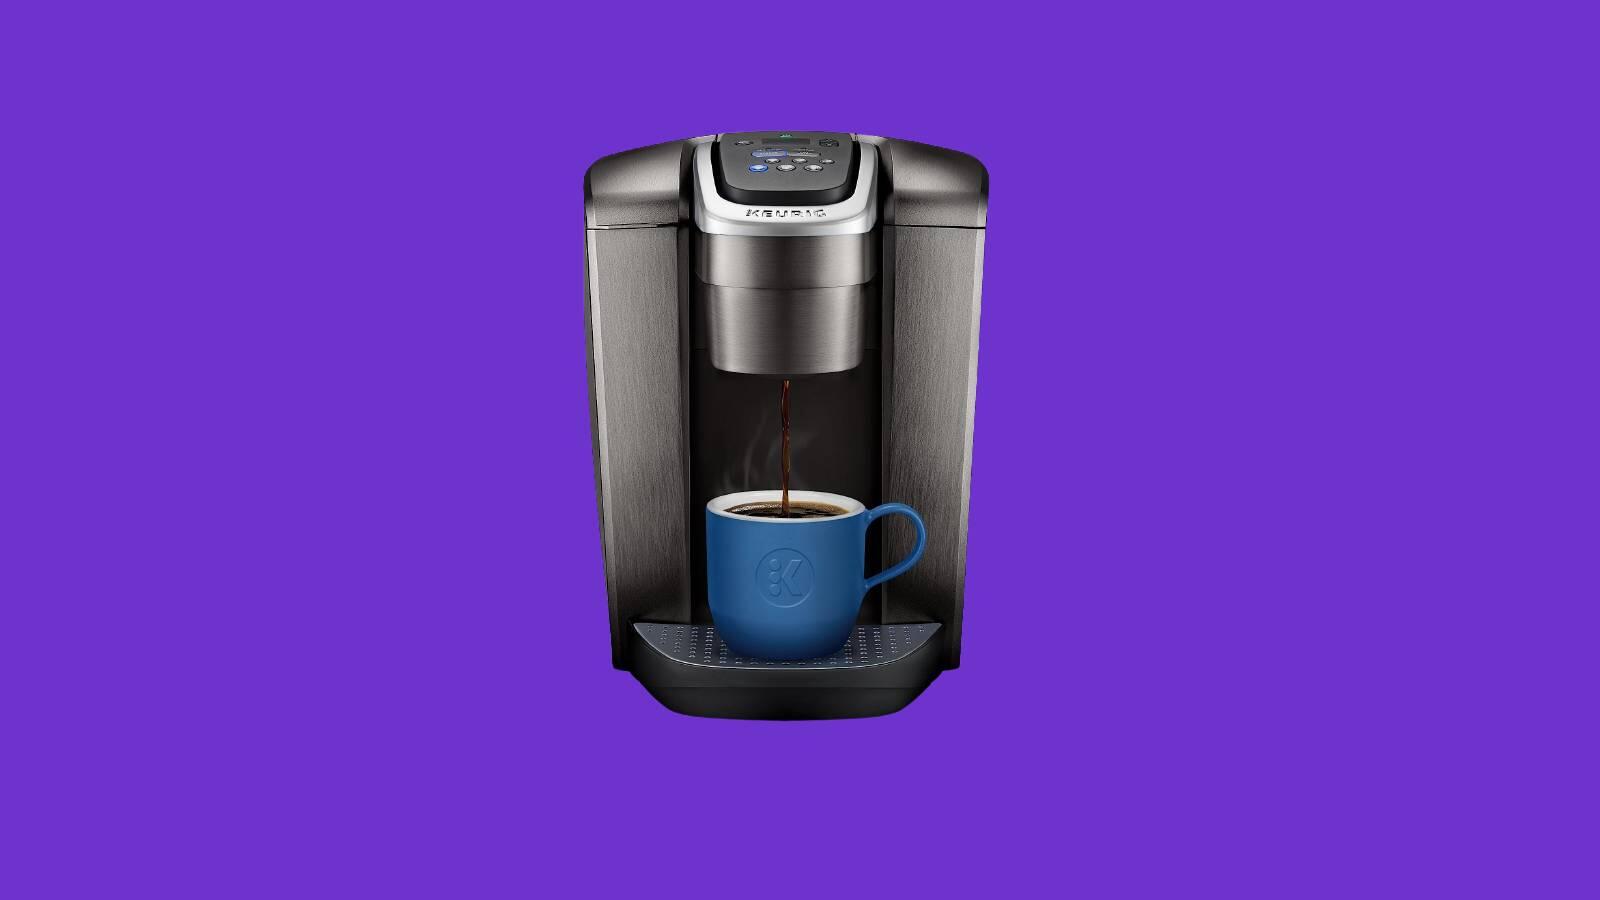 Keurig's Compact K-Slim Single-Server Brewer Is $50 Off Right Now - CNET